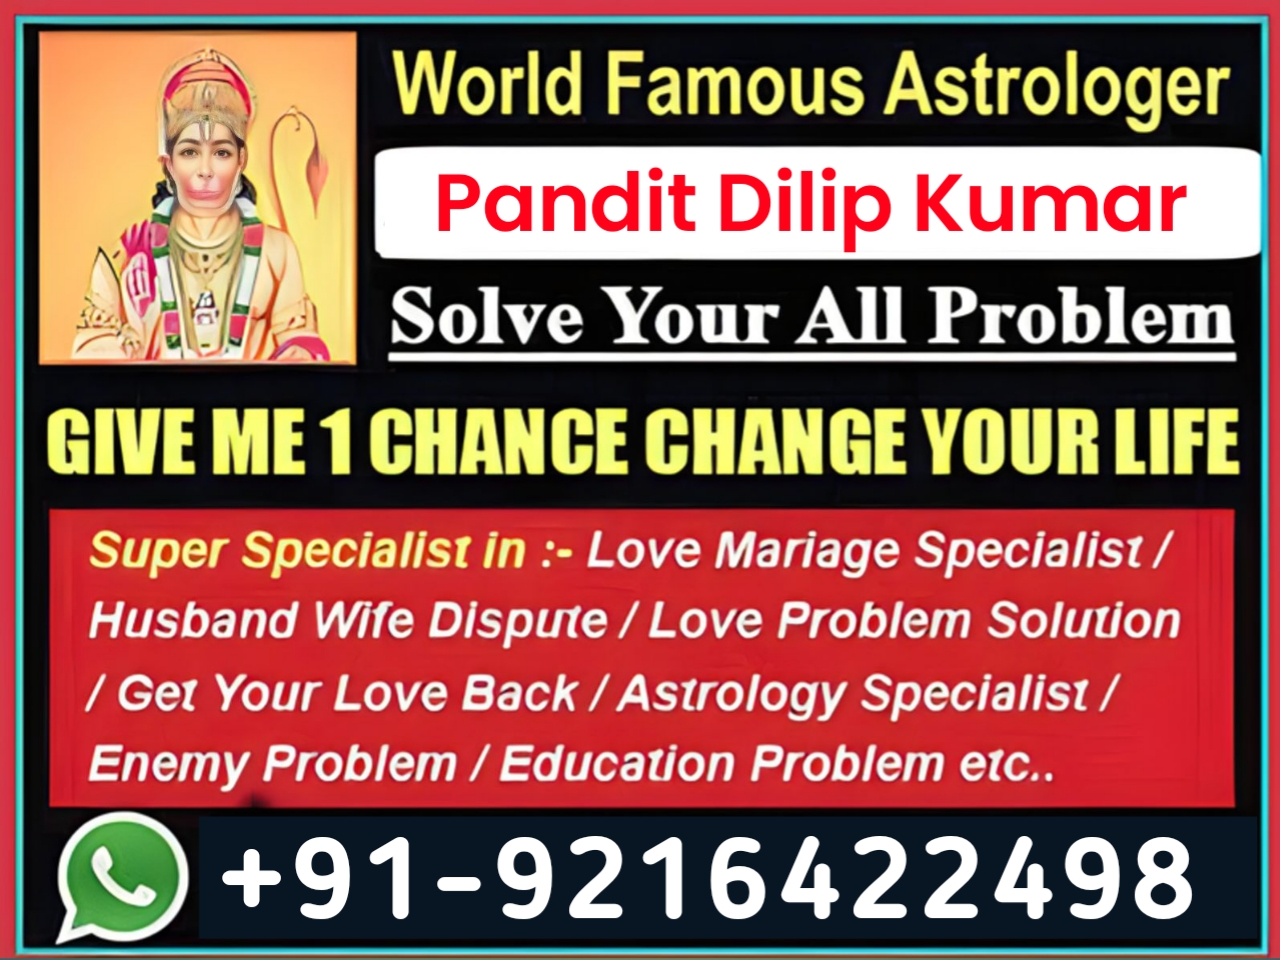 a,
== ¢

World Famous Astrologer

ar Pandit Dilip Kumar
BUA Solve Your All Problem

GIVE ME 1 CHANCE CHANGE YOUR LIFE

Super Specialist in :- Love Mariage Specialist/
Husband Wife Dispute / Love Problem Solution
/ Get Your Love Back / Astrology Specialist /
Enemy Problem / Education Problem etc..

© +91-9216422498